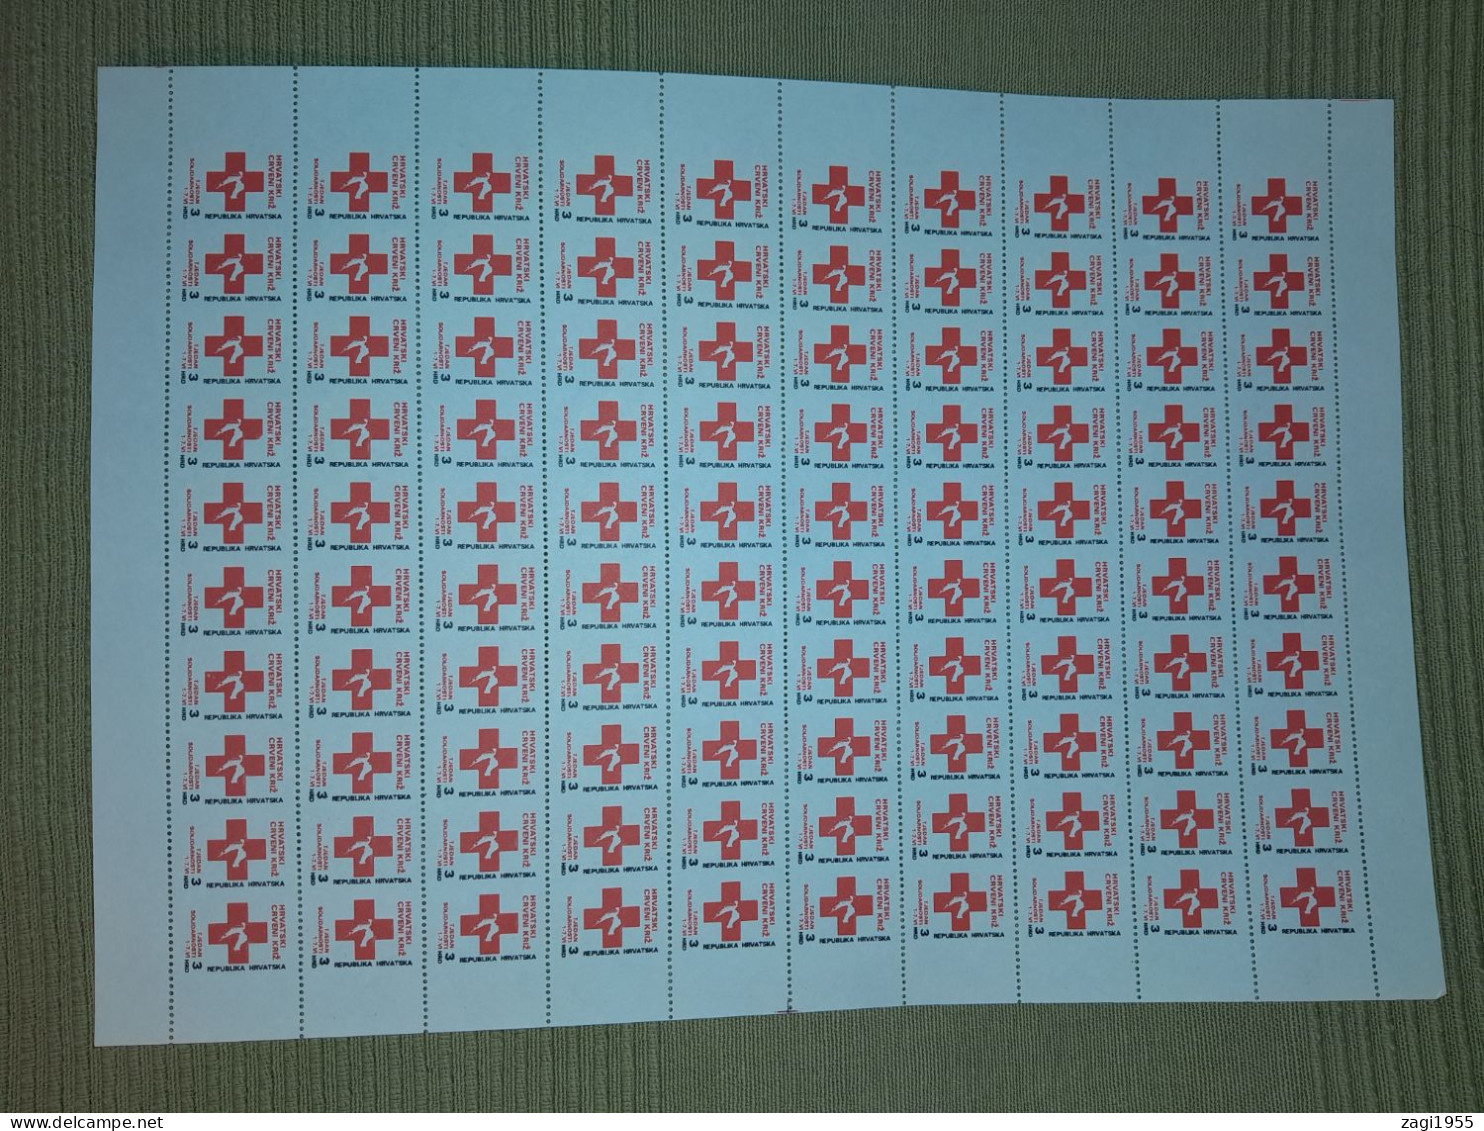 Croatia 1992 Sheet Red Cross Solidarity One Half IMPERFORATED, Perforated Only Horisontally - Croazia